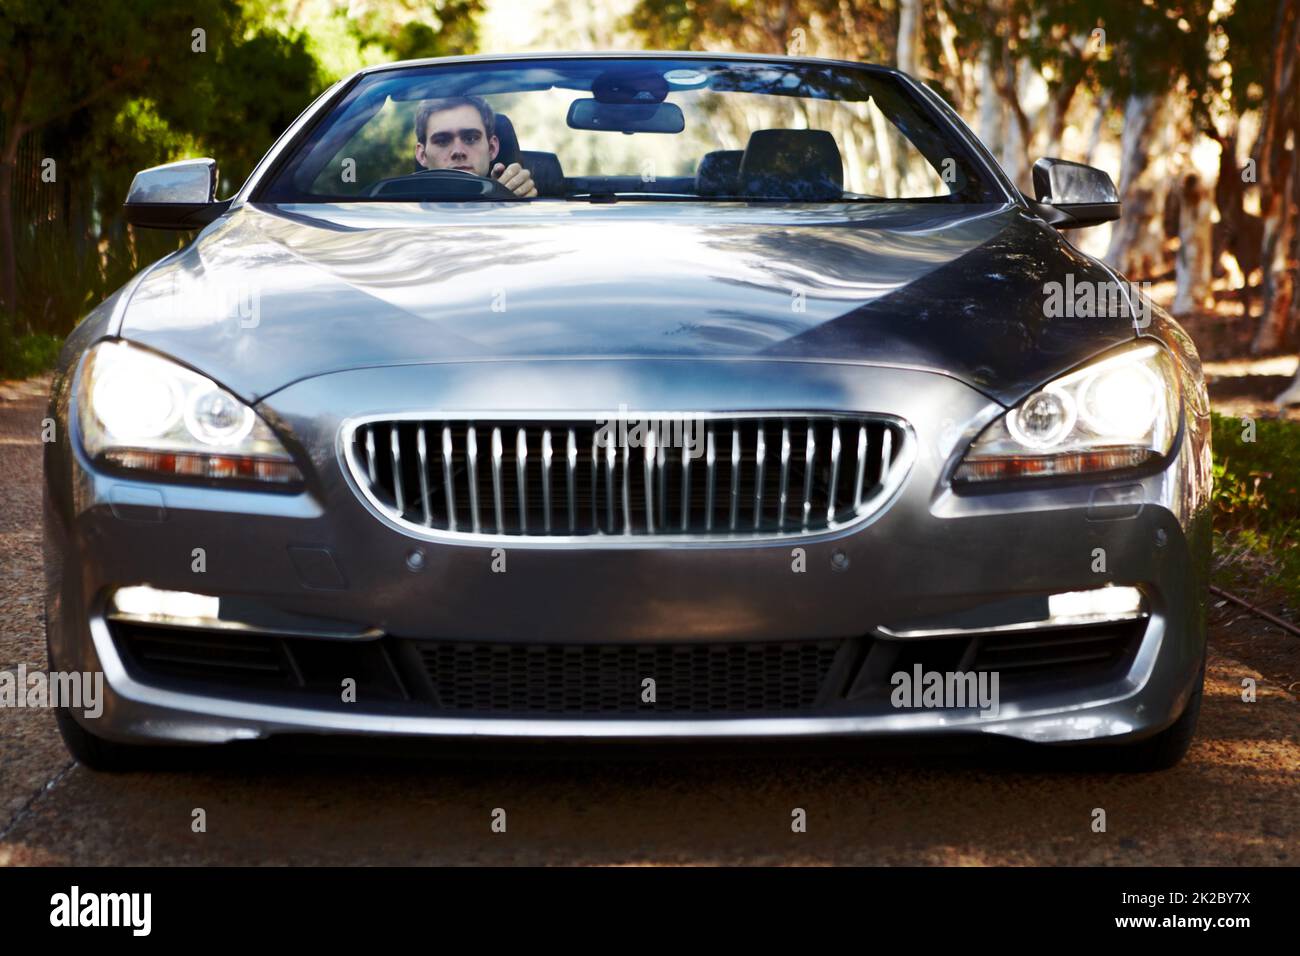 Hes serious about driving. Portrait of a man sitting his silver sportscar which is facing you. Stock Photo